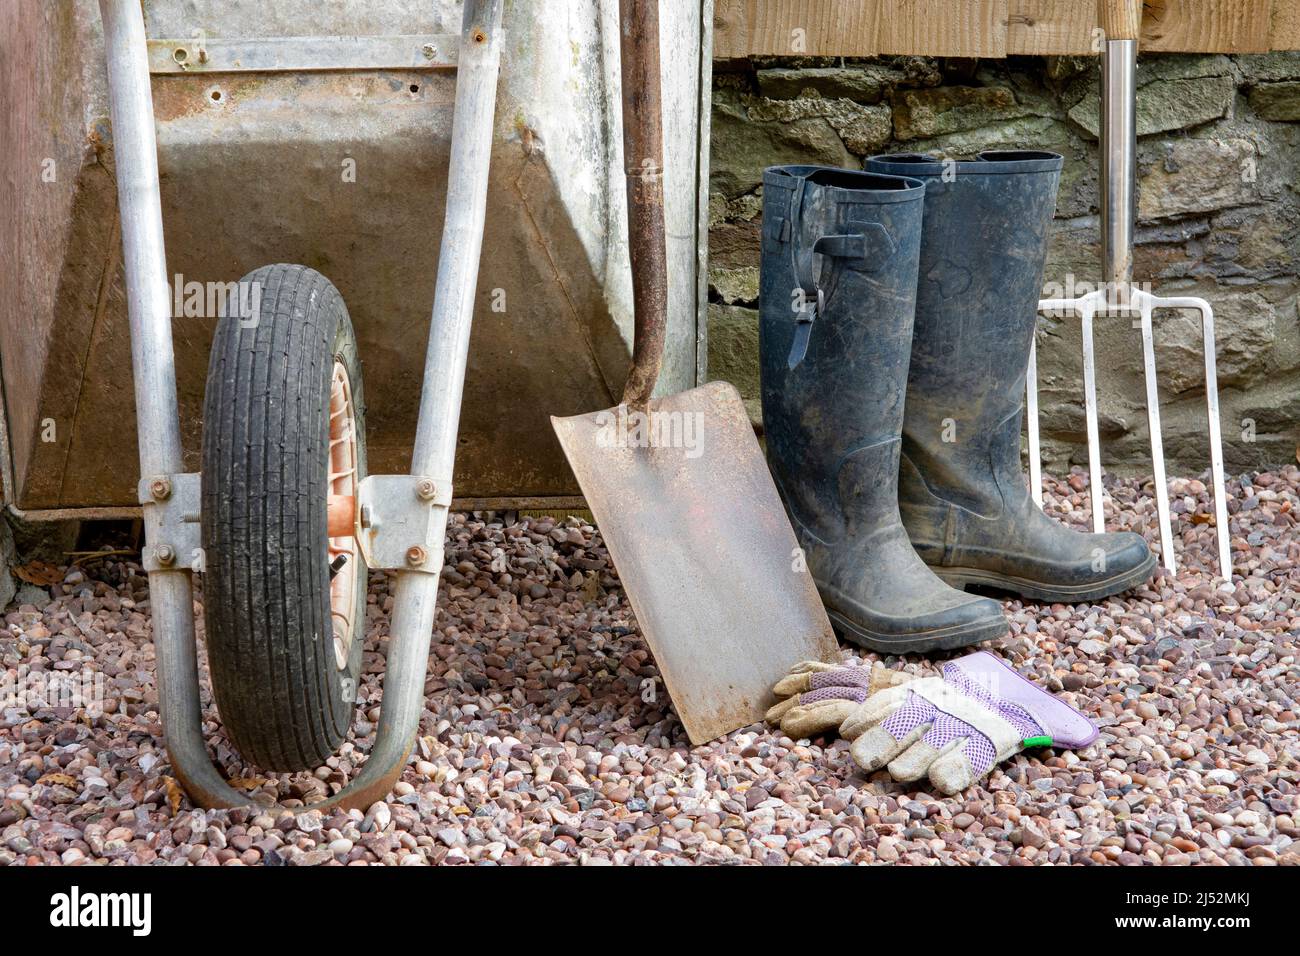 Gardening items including wheelbarrow, large spade, large fork, gloves and wellies Stock Photo